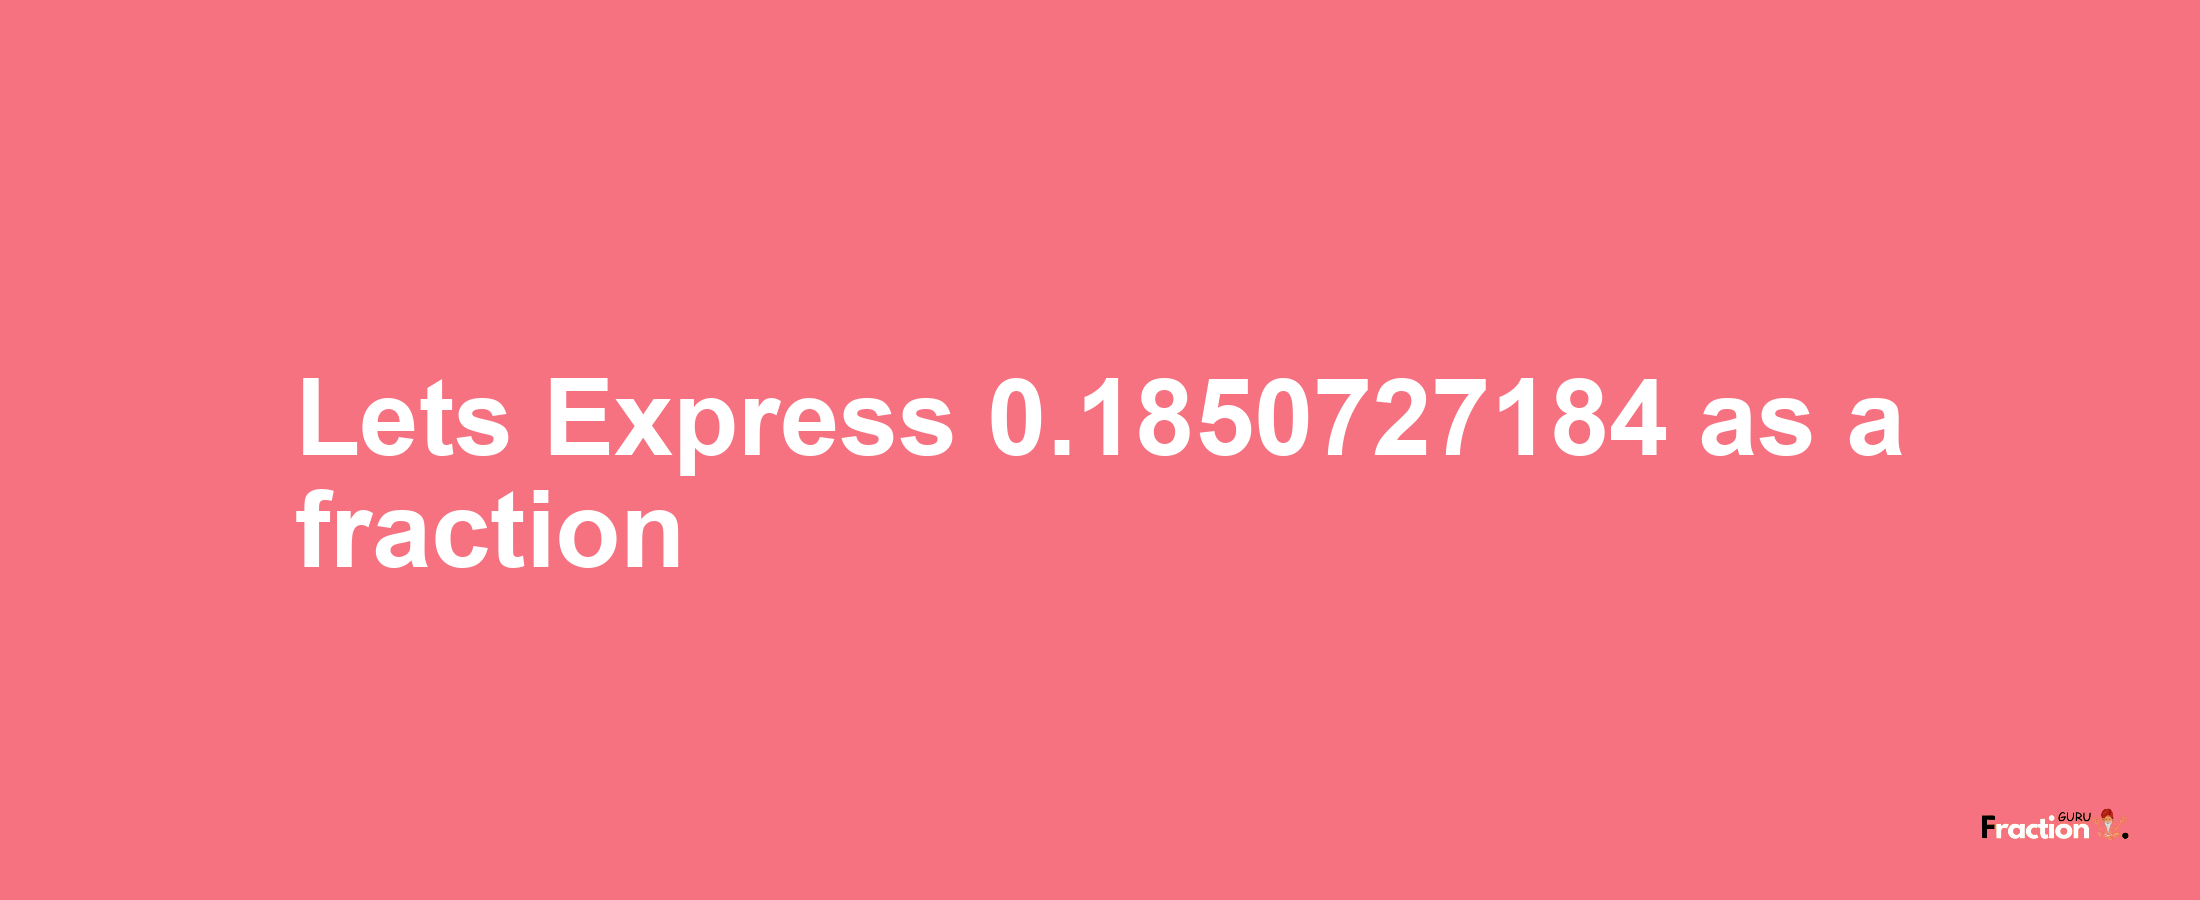 Lets Express 0.1850727184 as afraction